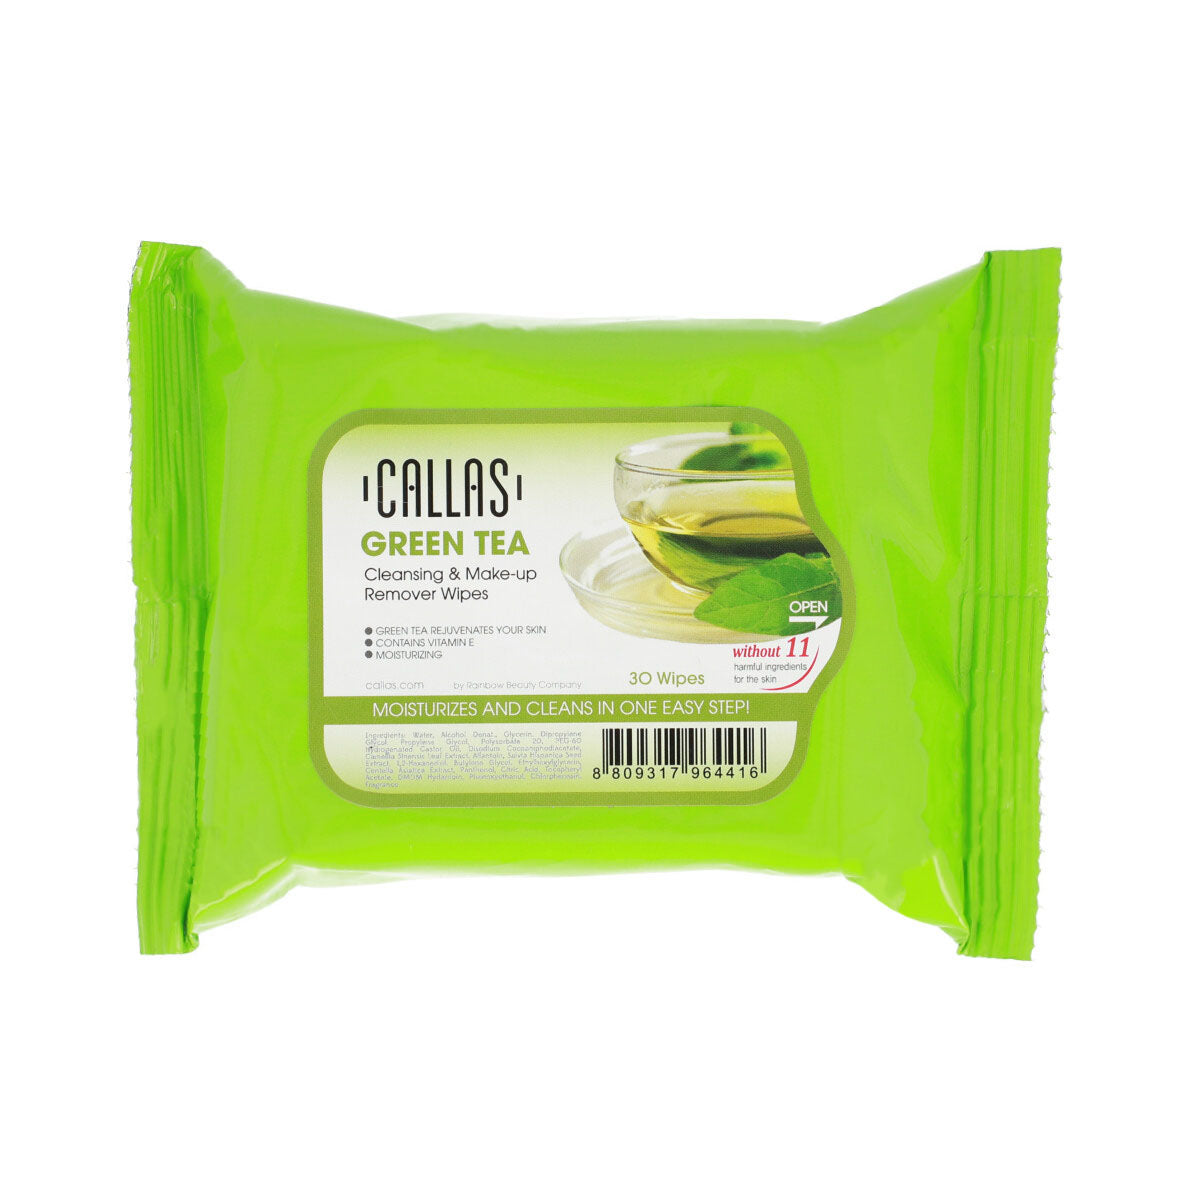 Cleansing and Make Up Remover Wipes Green Tea